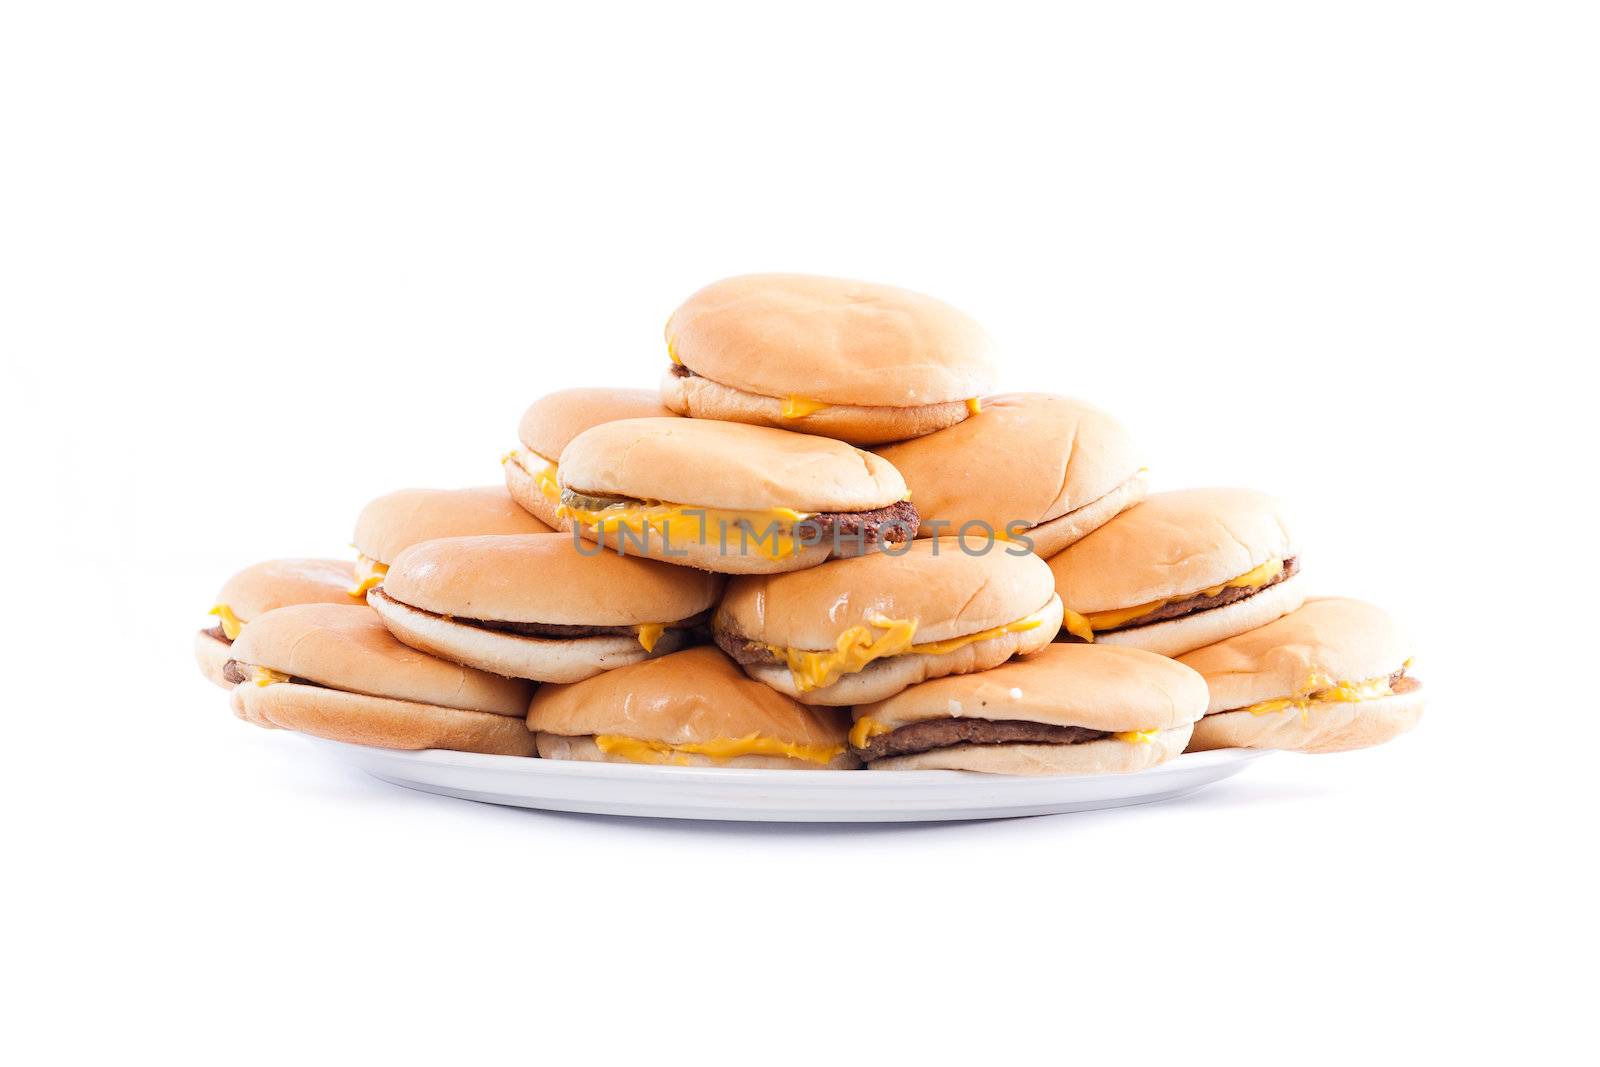 A plate full of cheesburgers isolated on a white background